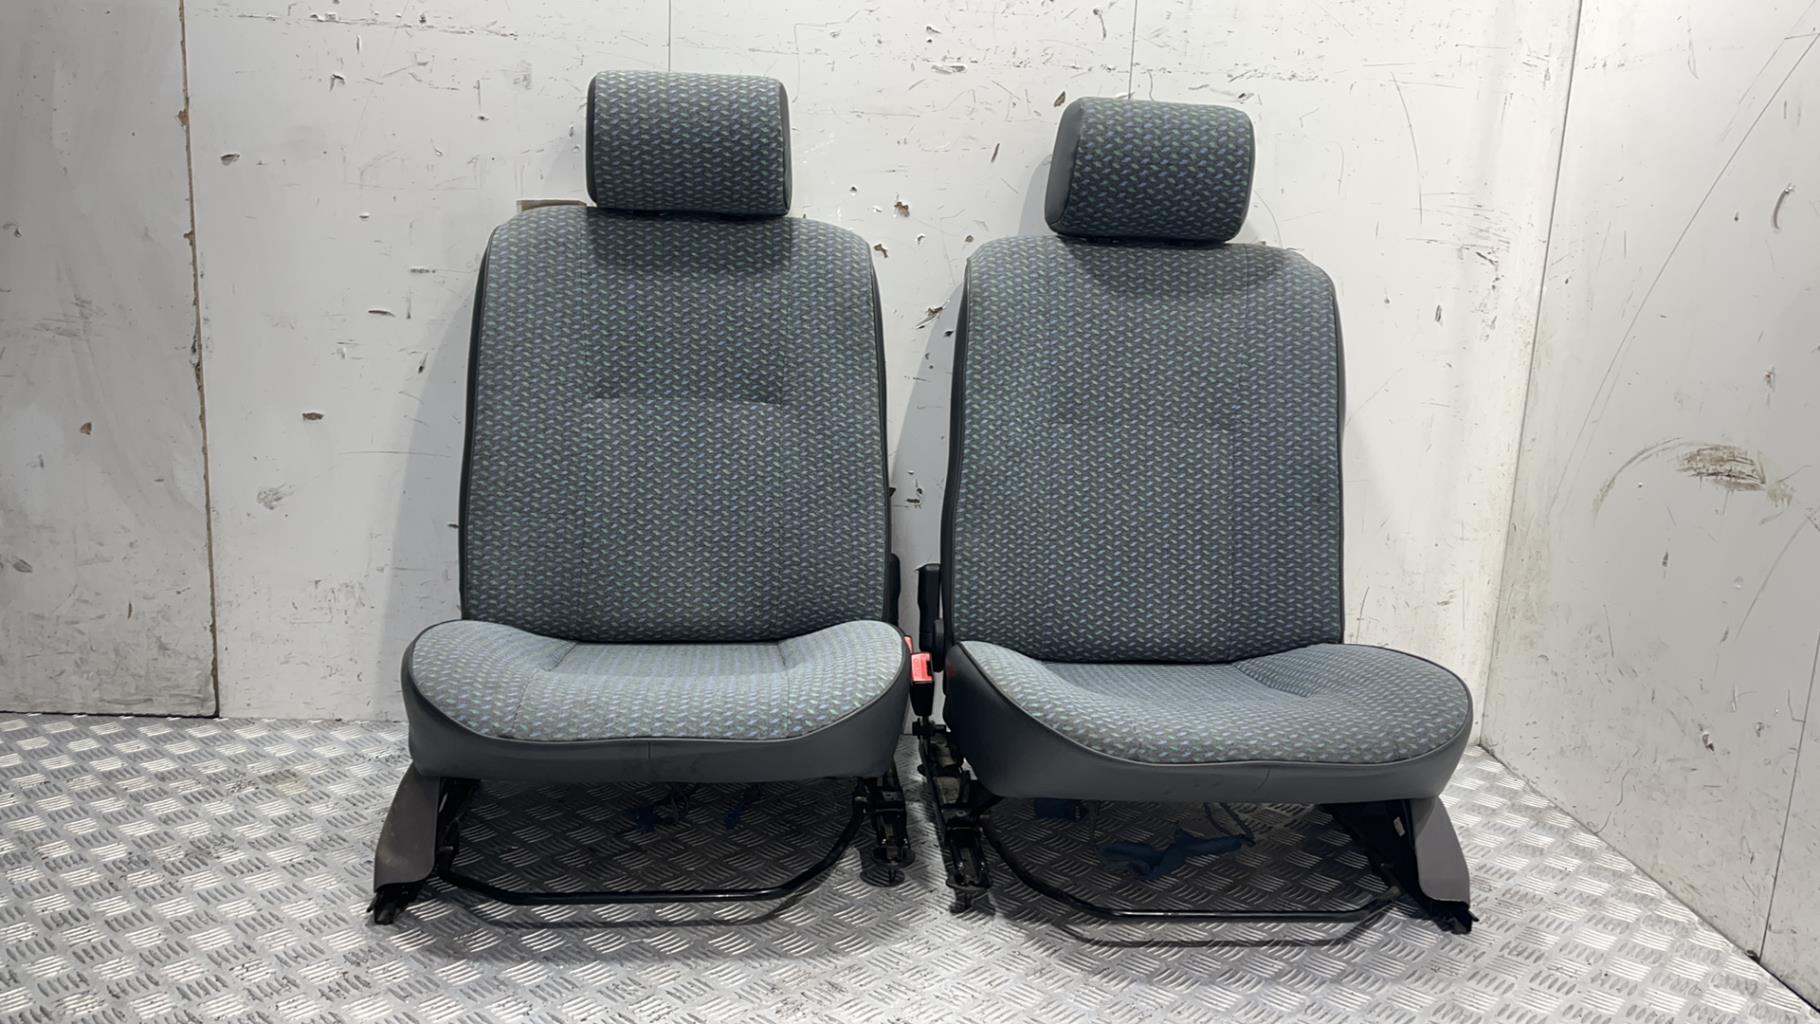 Interieur complet renault clio 1 phase 1